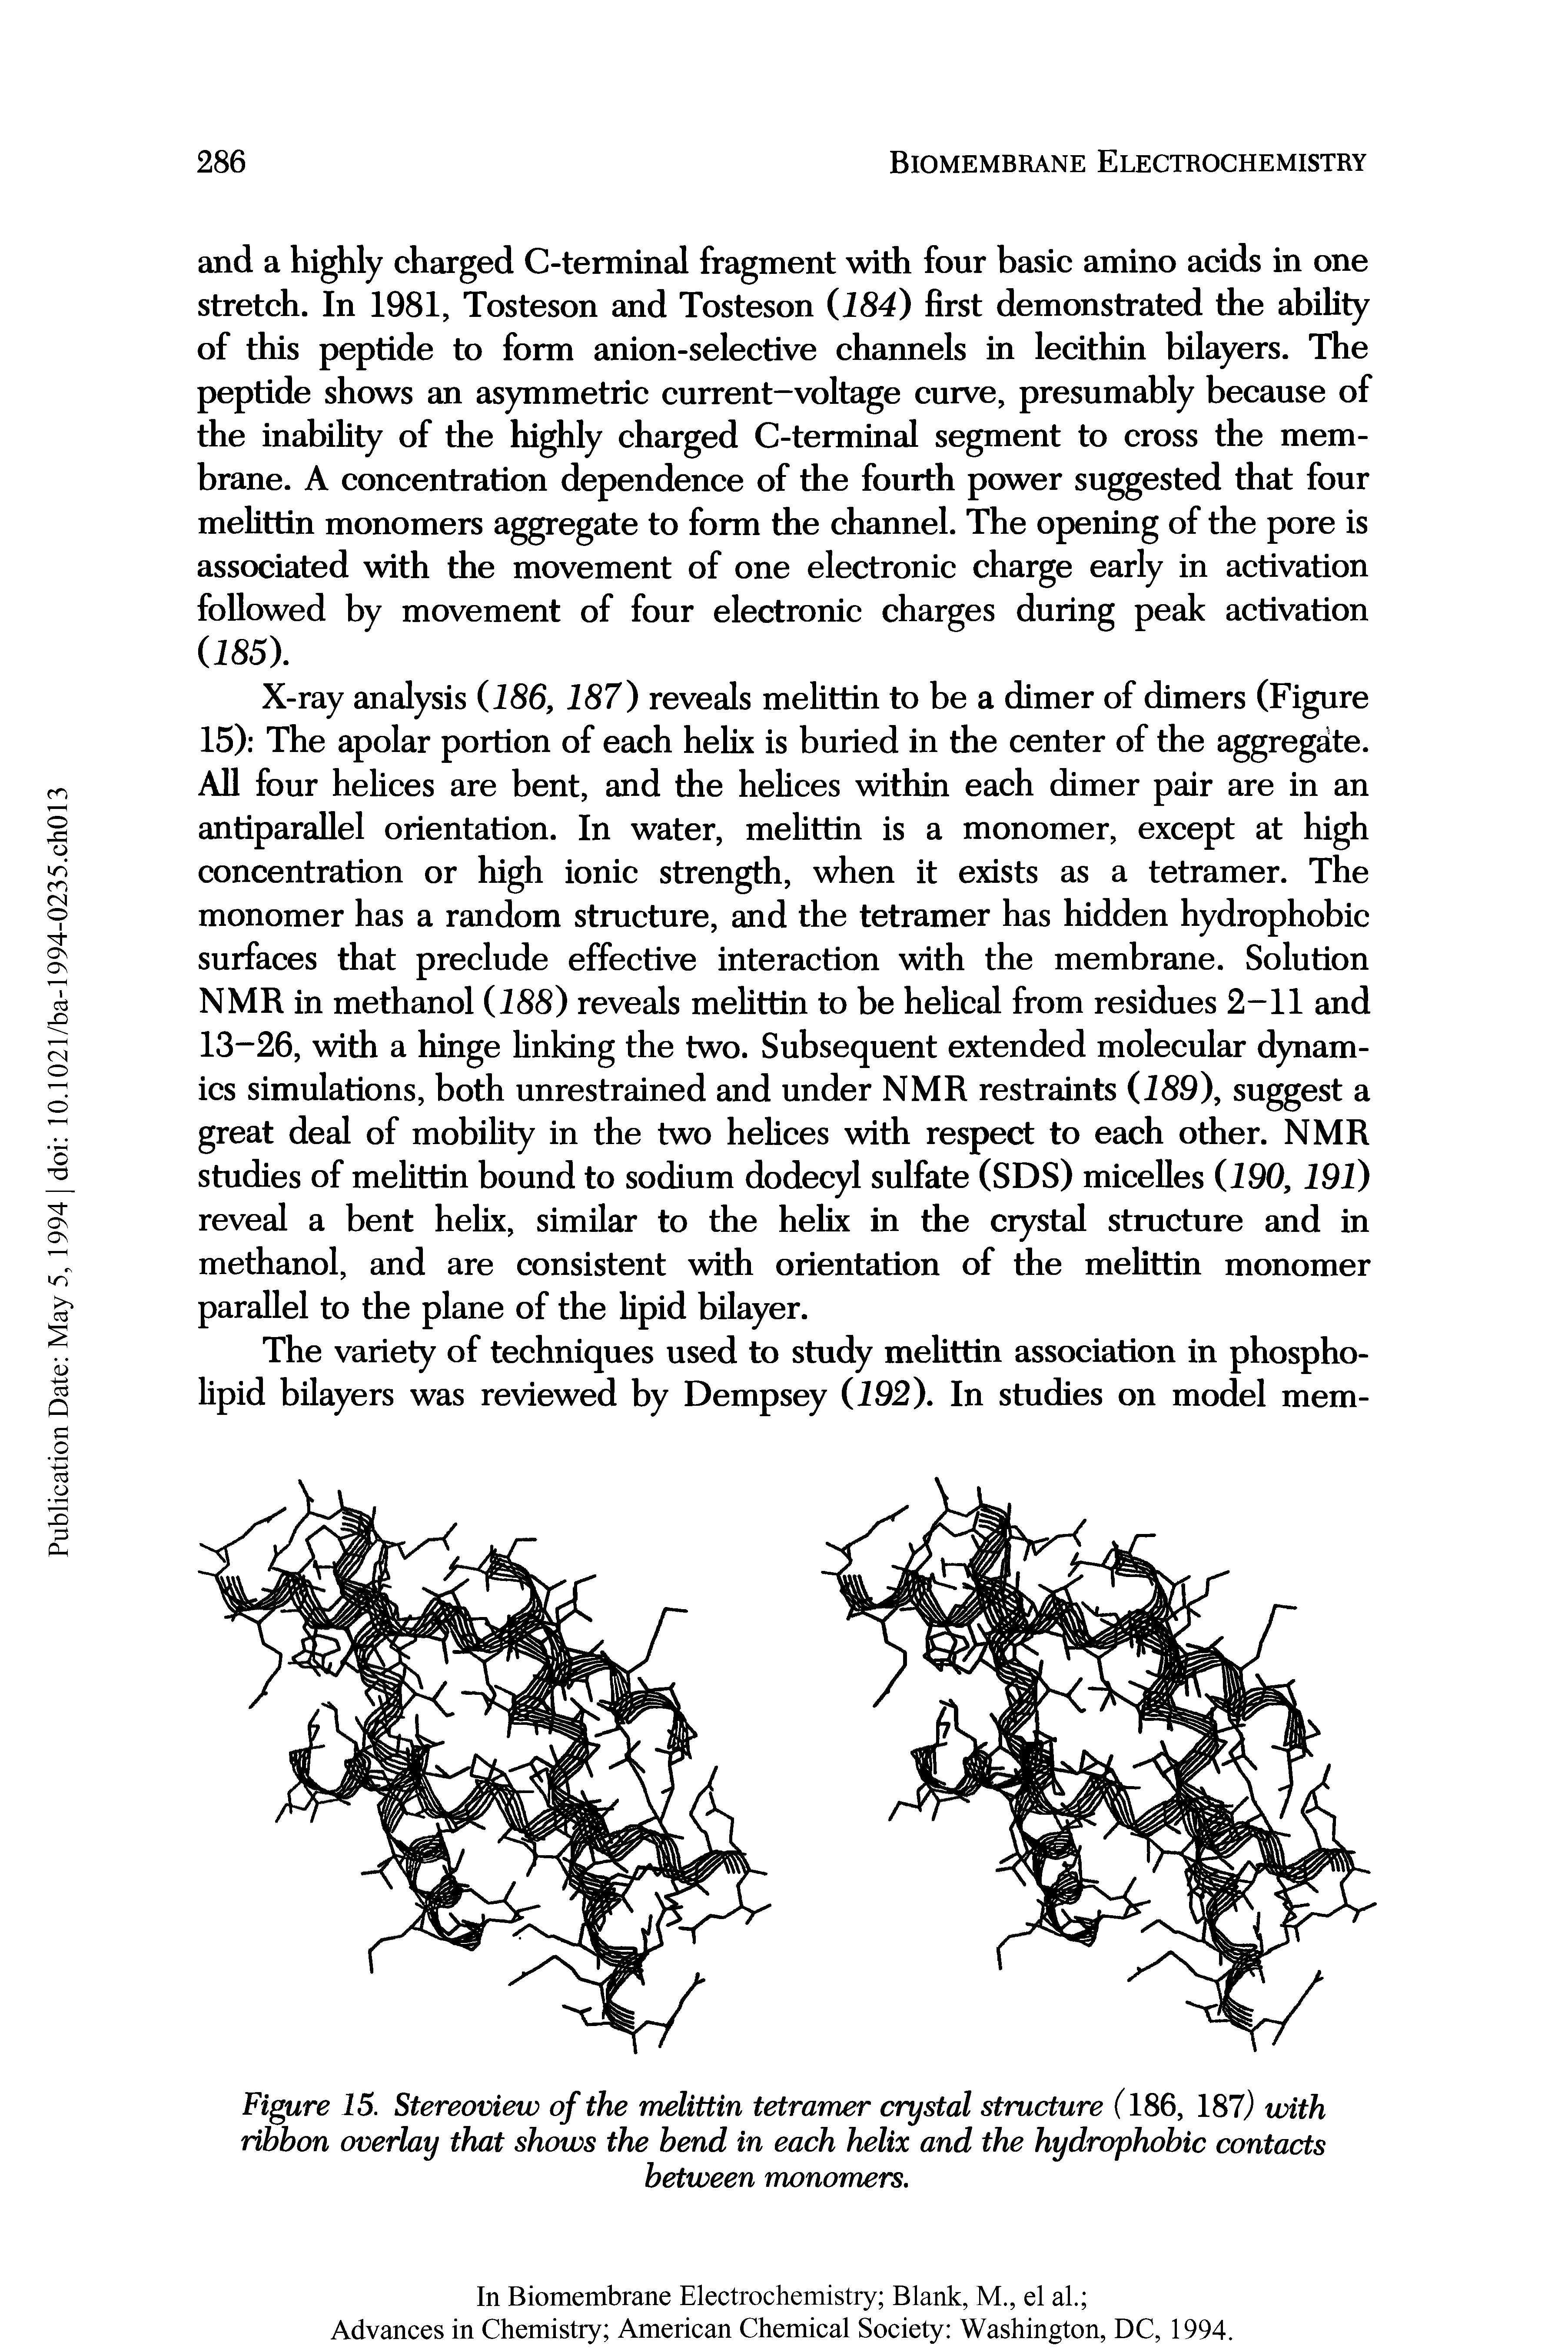 Figure 15. Stereoview of the melittin tetramer crystal structure (186, 187) with ribbon overlay that shows the bend in each helix and the hydrophobic contacts...